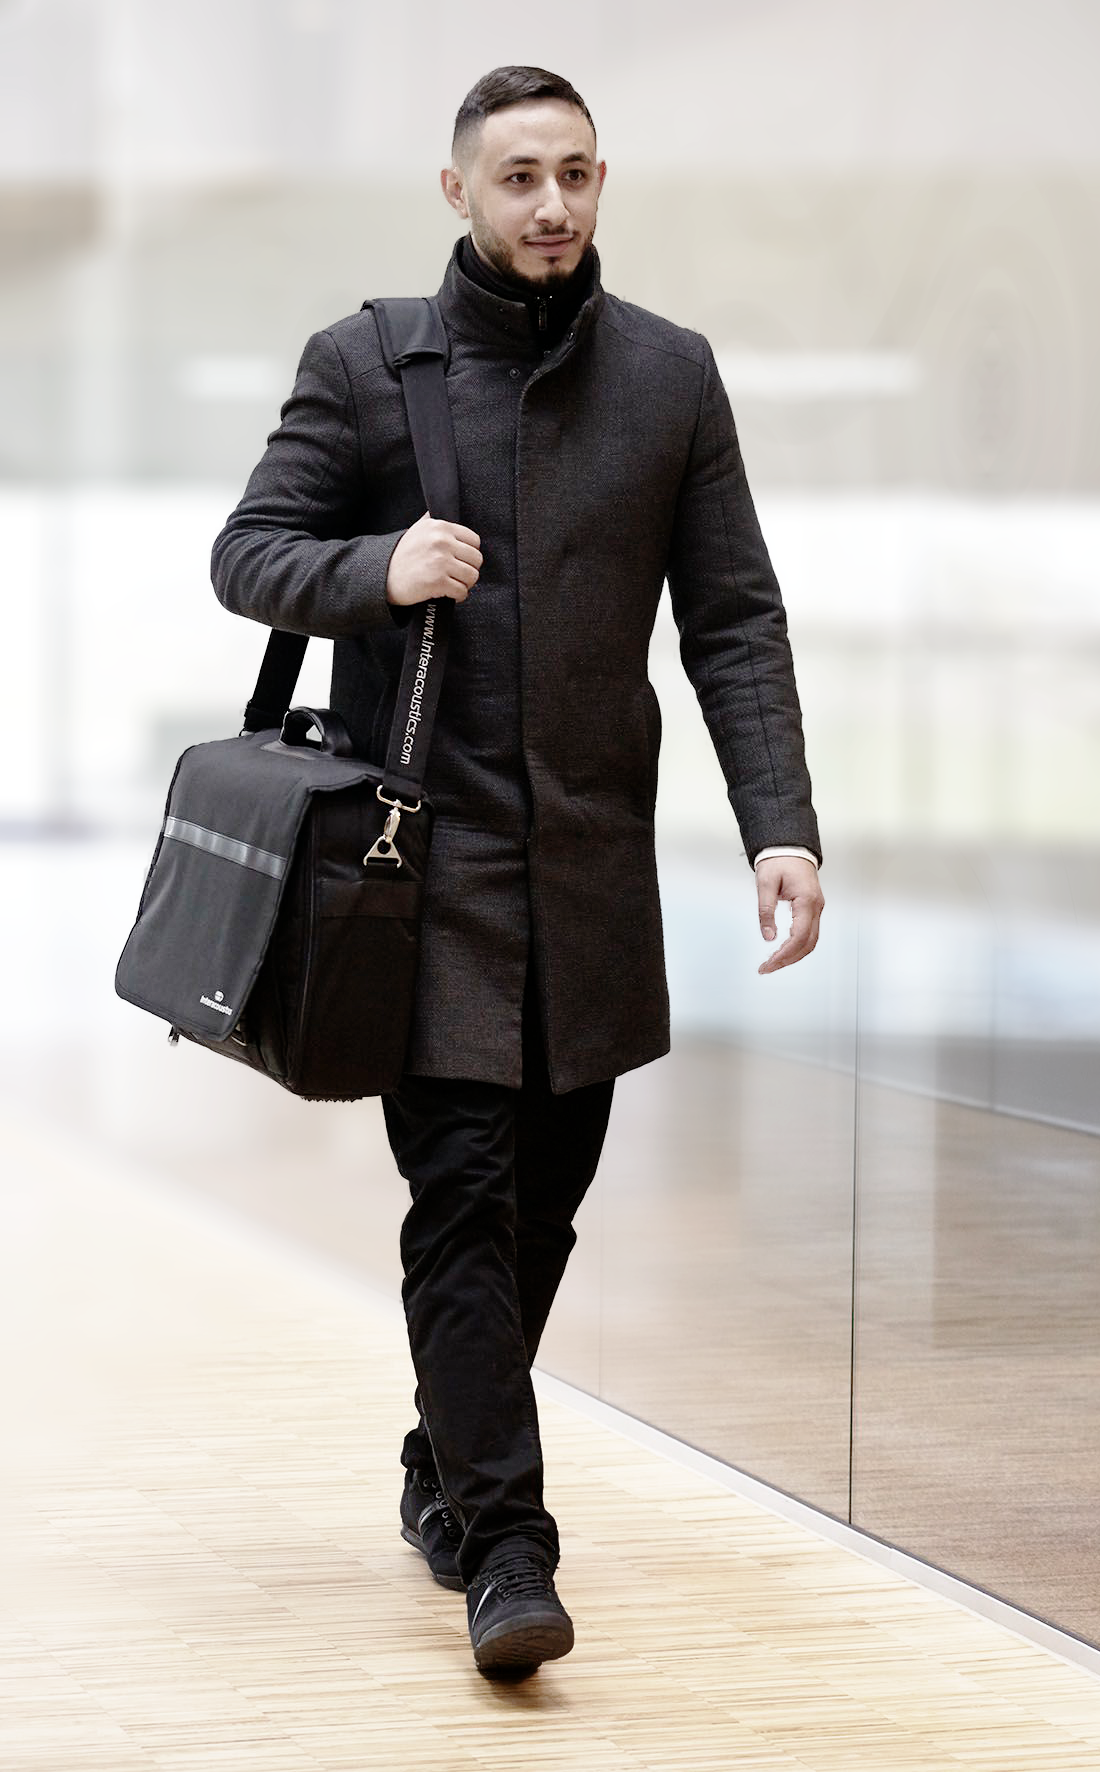 Man walking with AD528 carrying bag